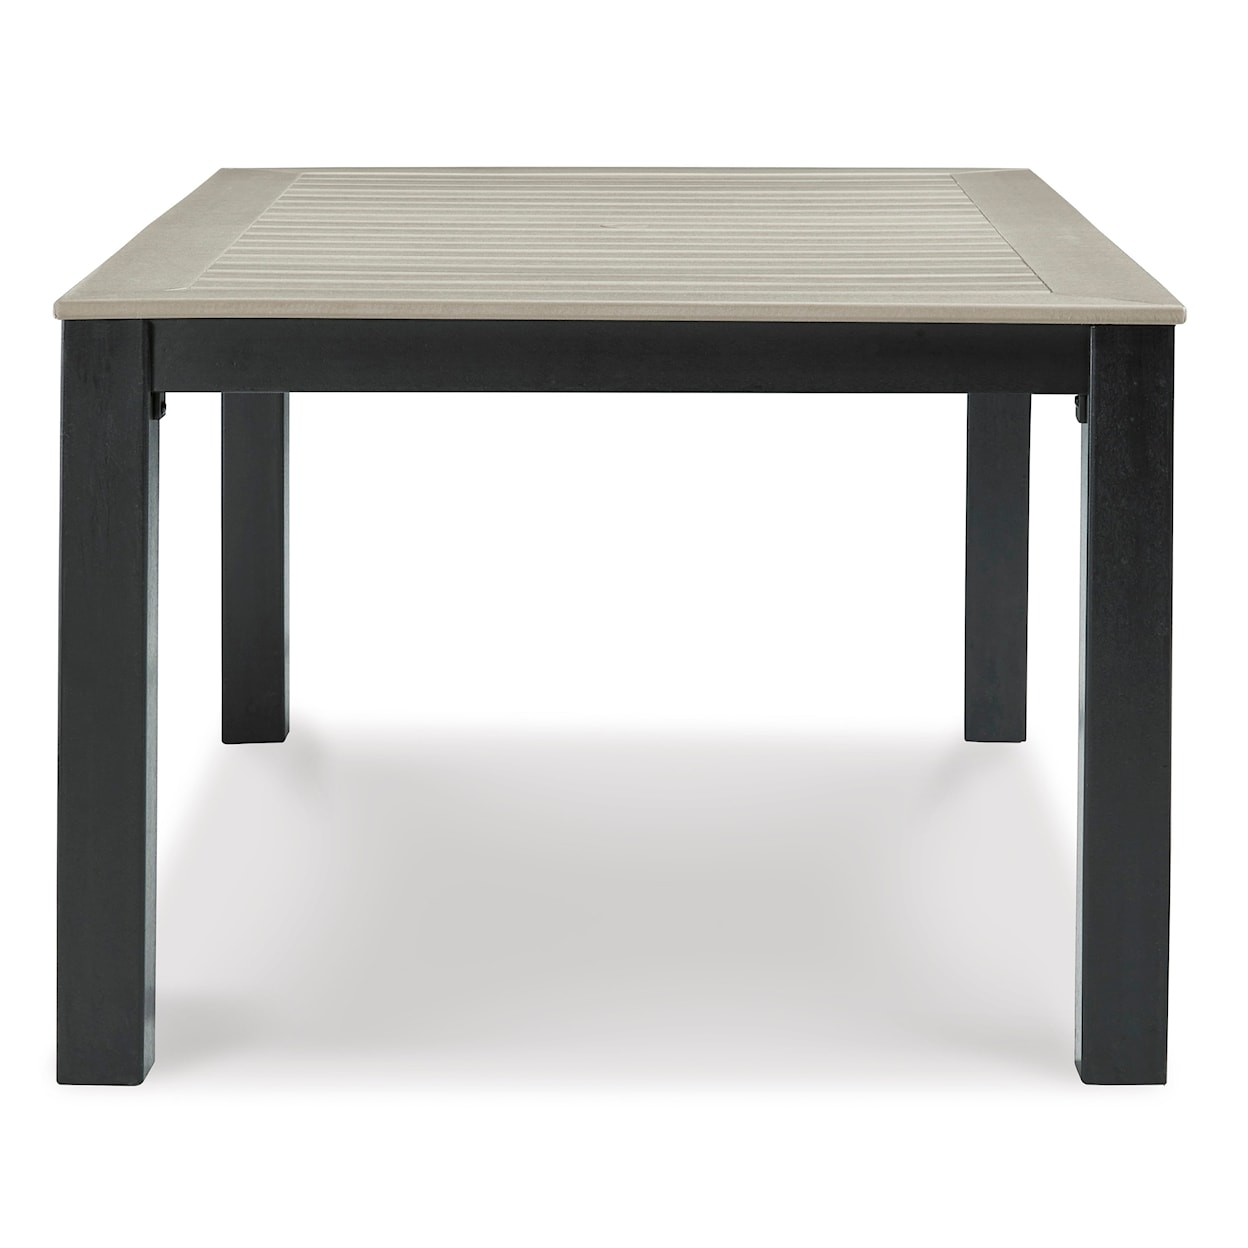 Benchcraft Mount Valley Outdoor Dining Table